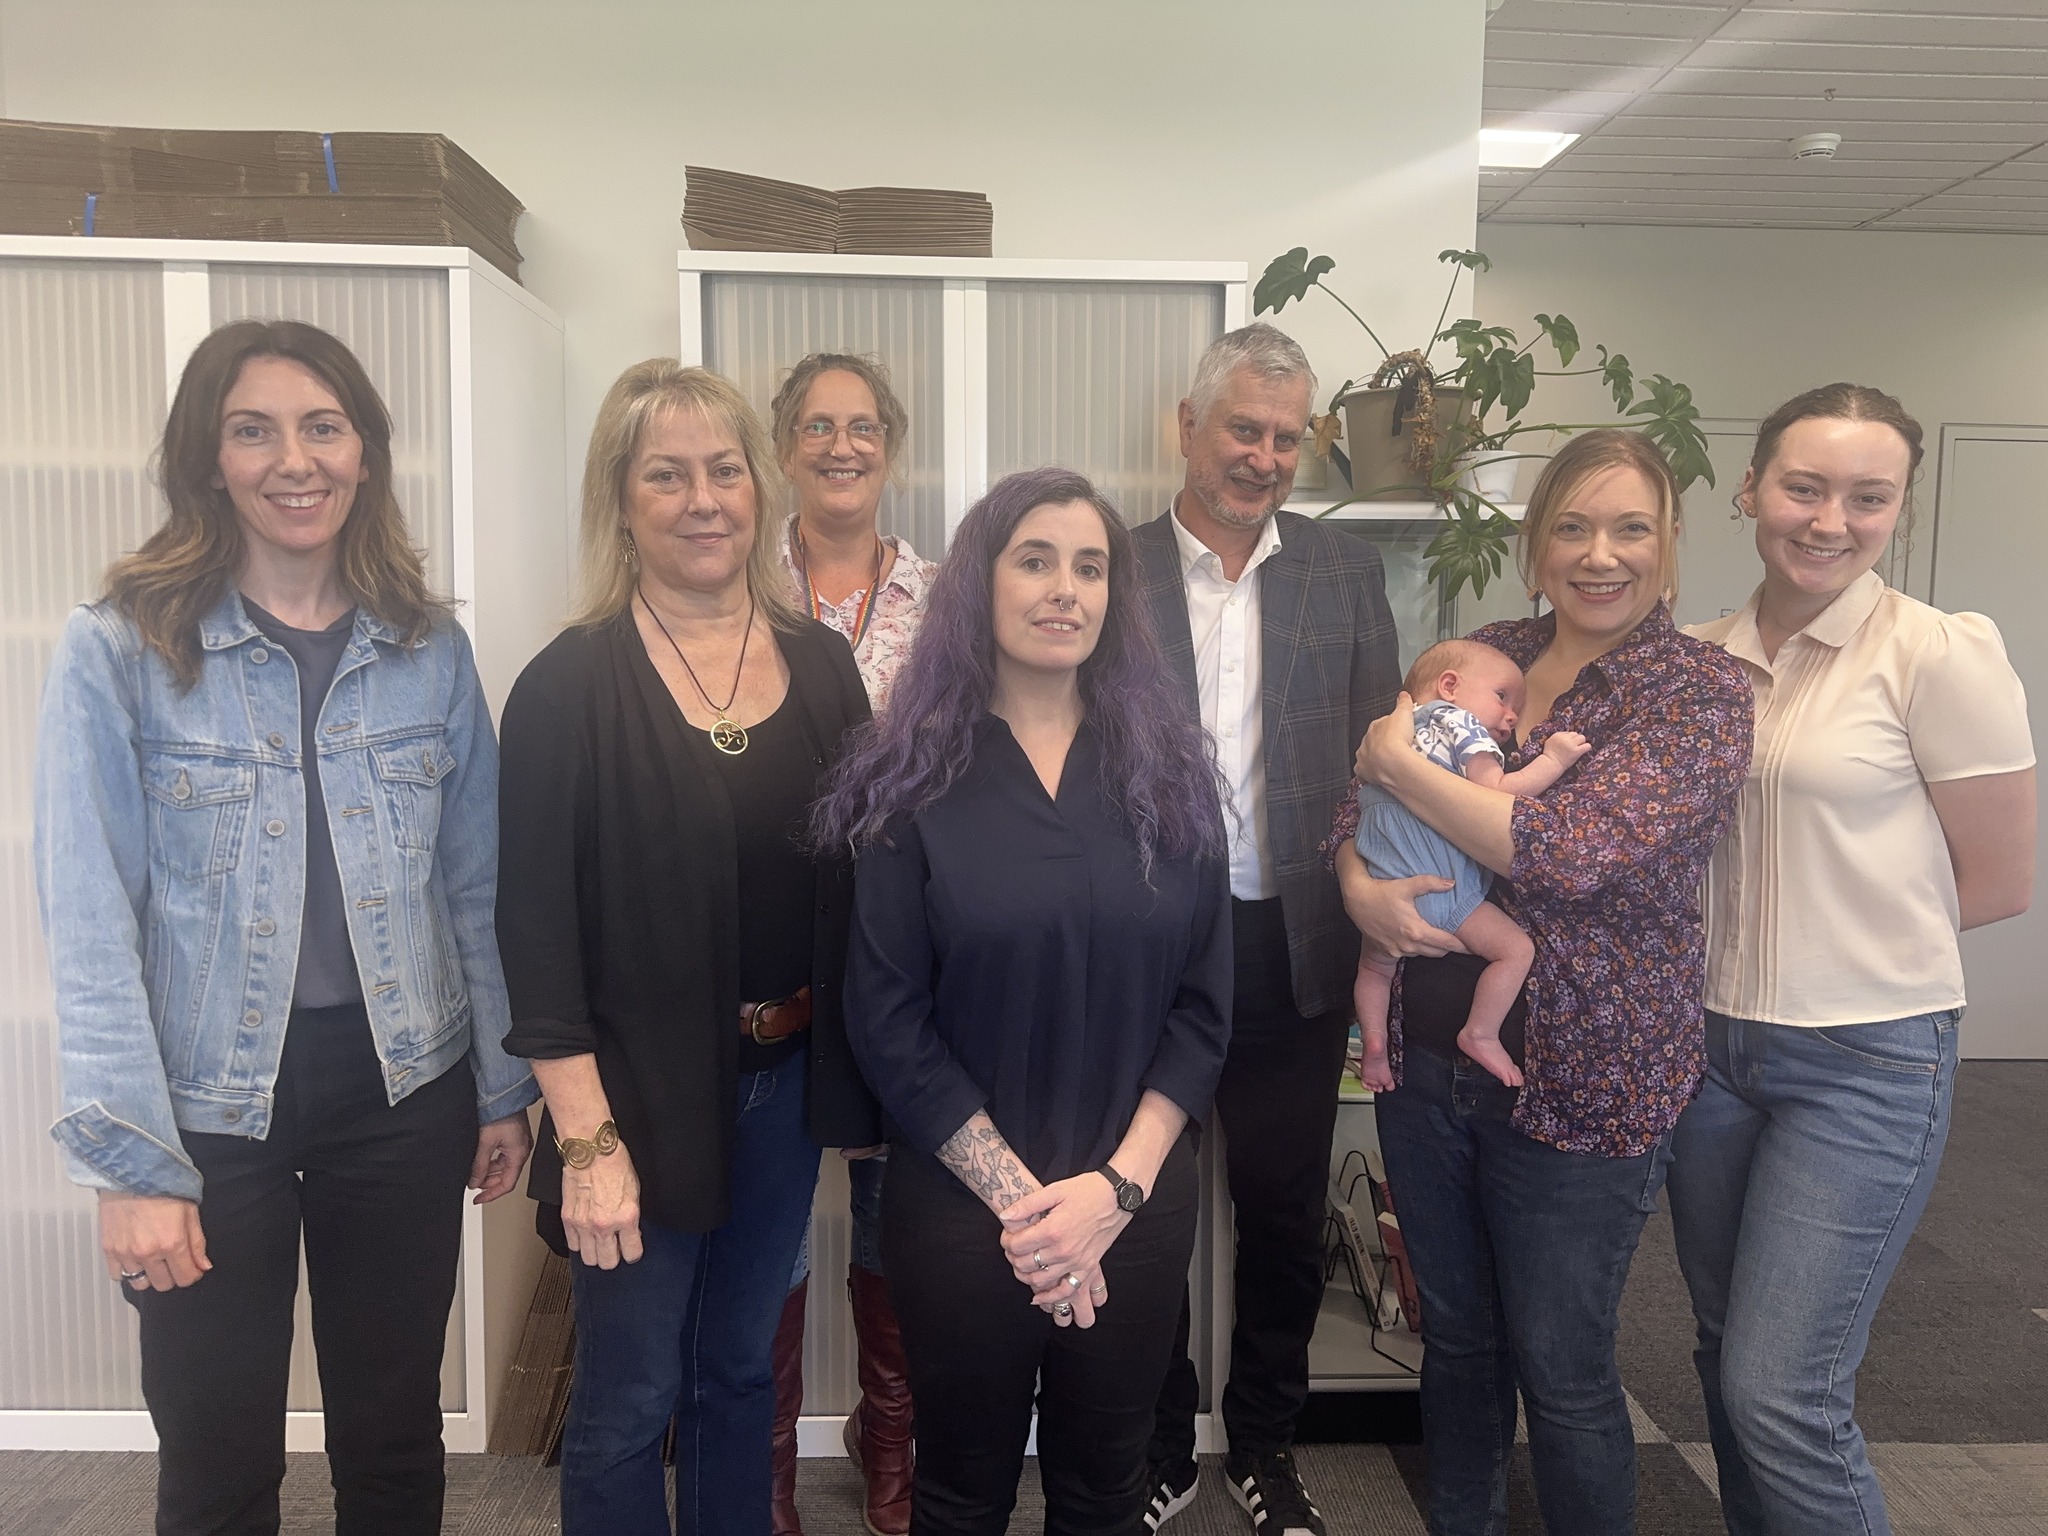 Kate Morgan, Sarah Cannon, Joanne Mullins, Elly Gridland, Malcolm Neil, Julia Carlomagno with newborn baby and Kayla Willson